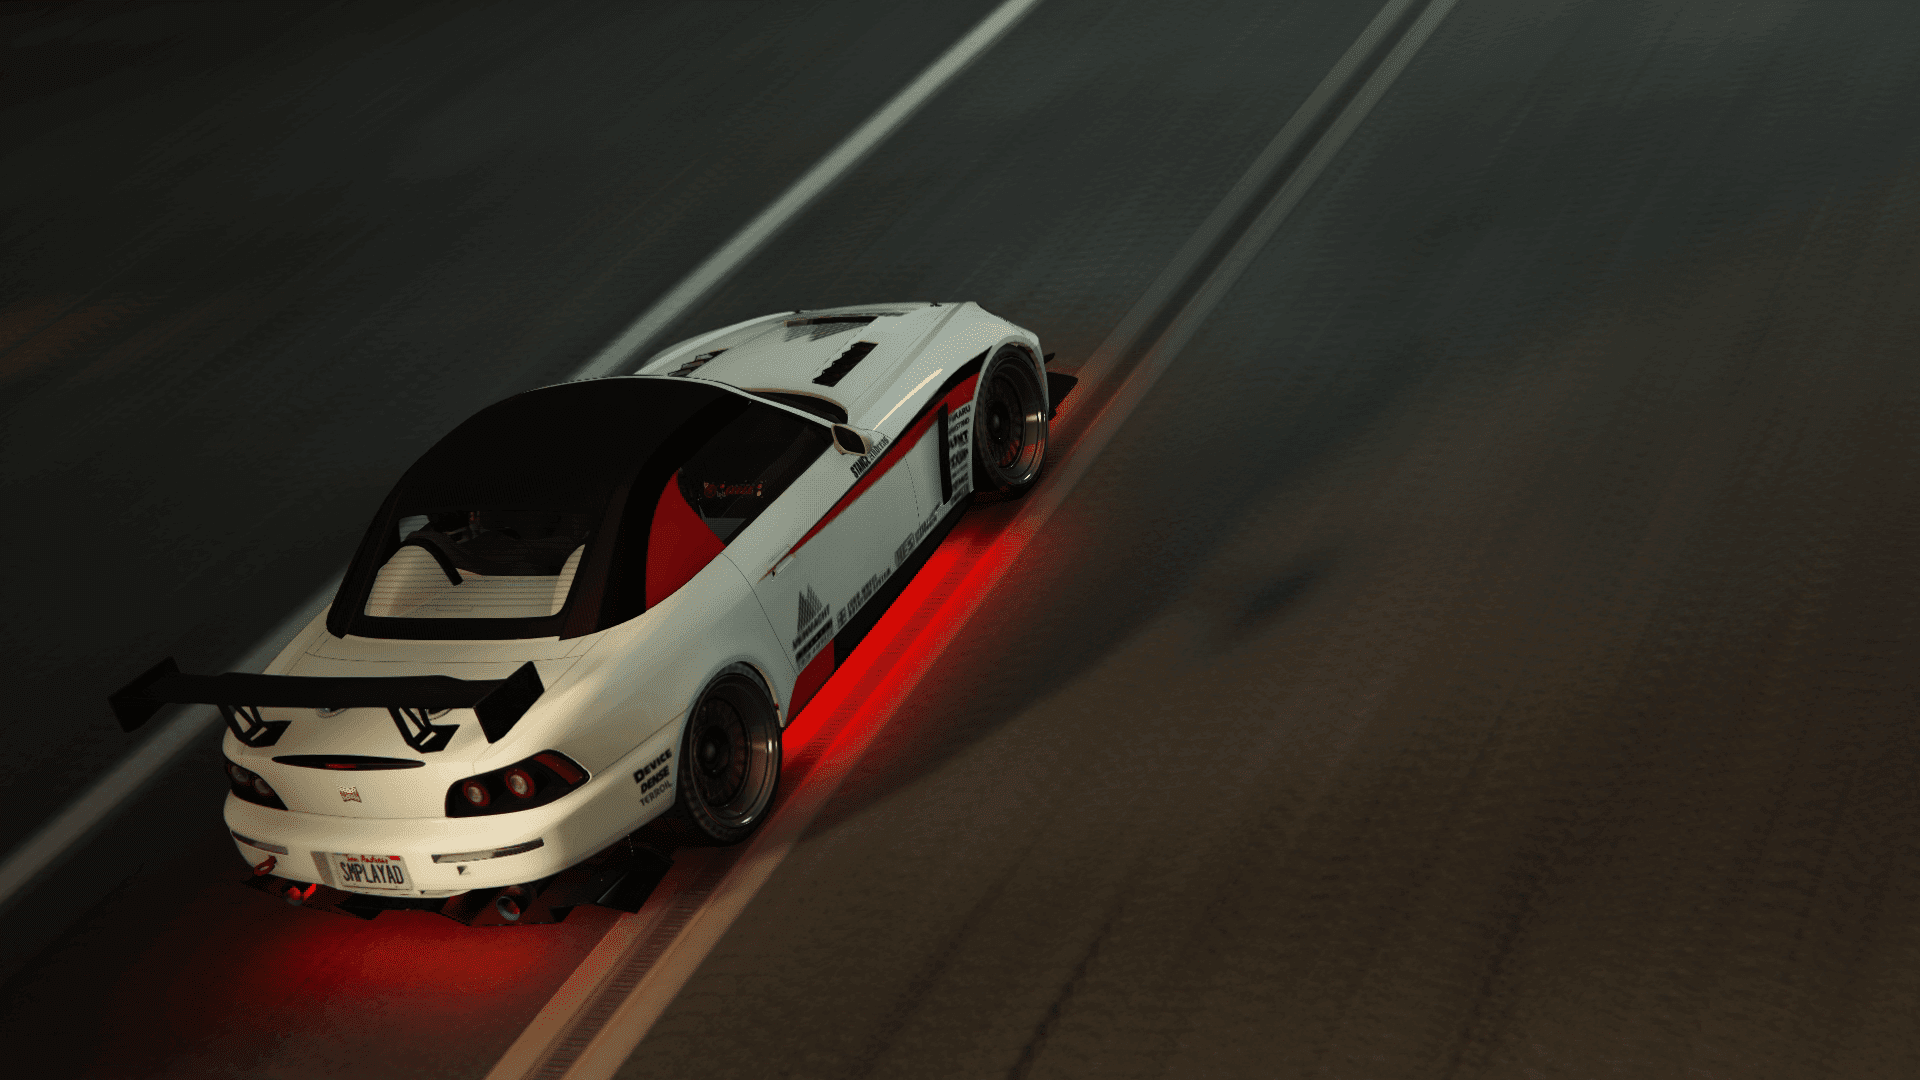 (HD) This Dinka RT3000 plays the role of a street racing demon that haunts the test track 3